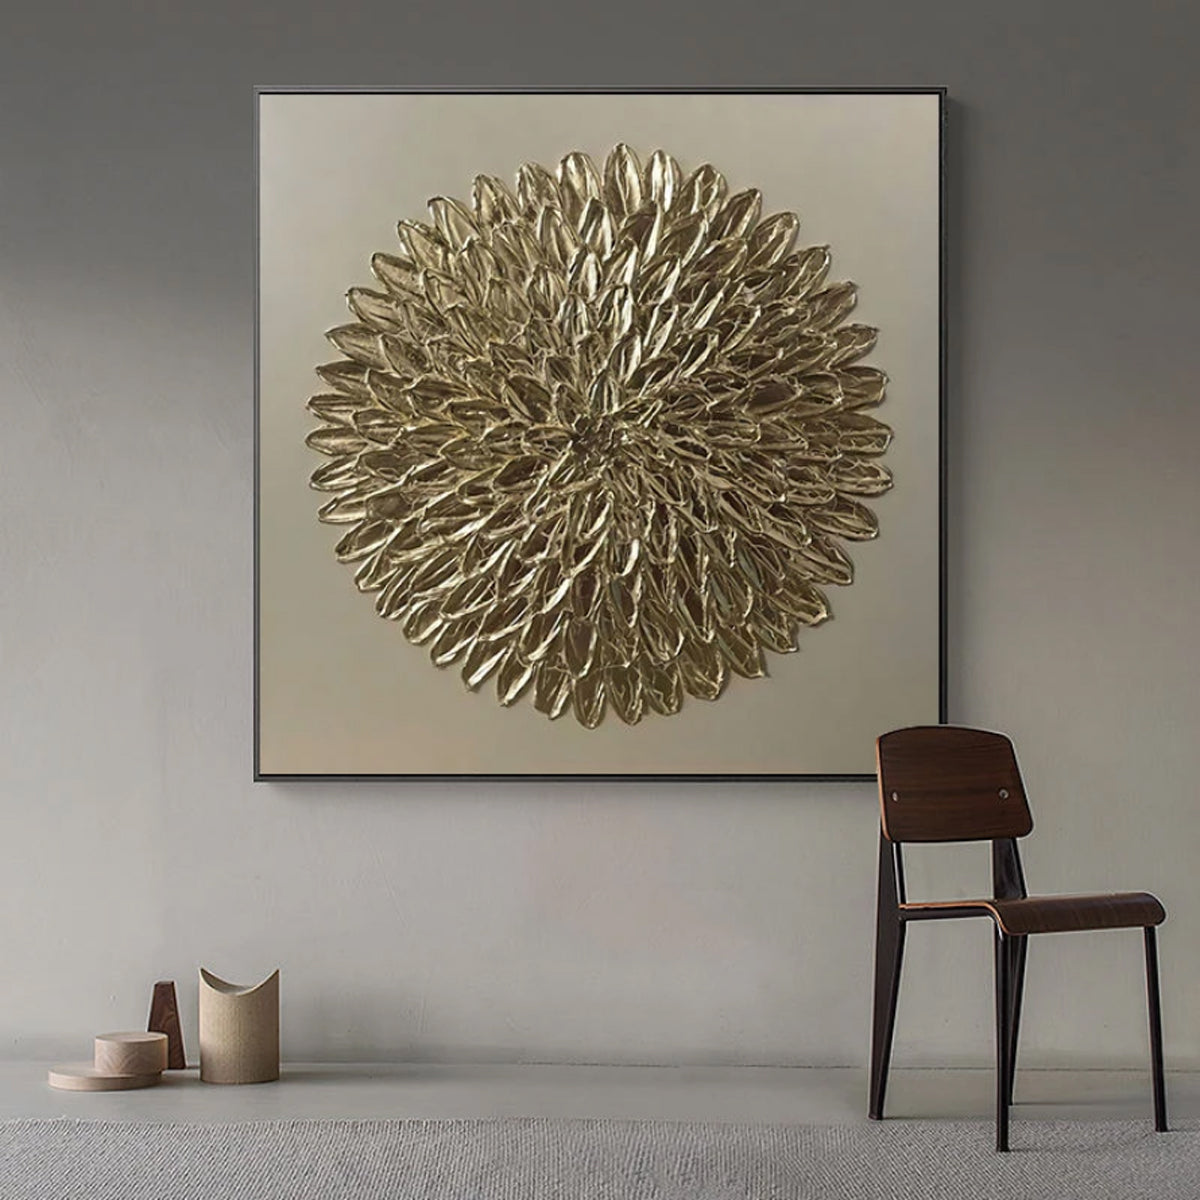 TPFLiving art print on abstract s motifs gold / canvas Traumpreisfabrik 5 – in black / 20